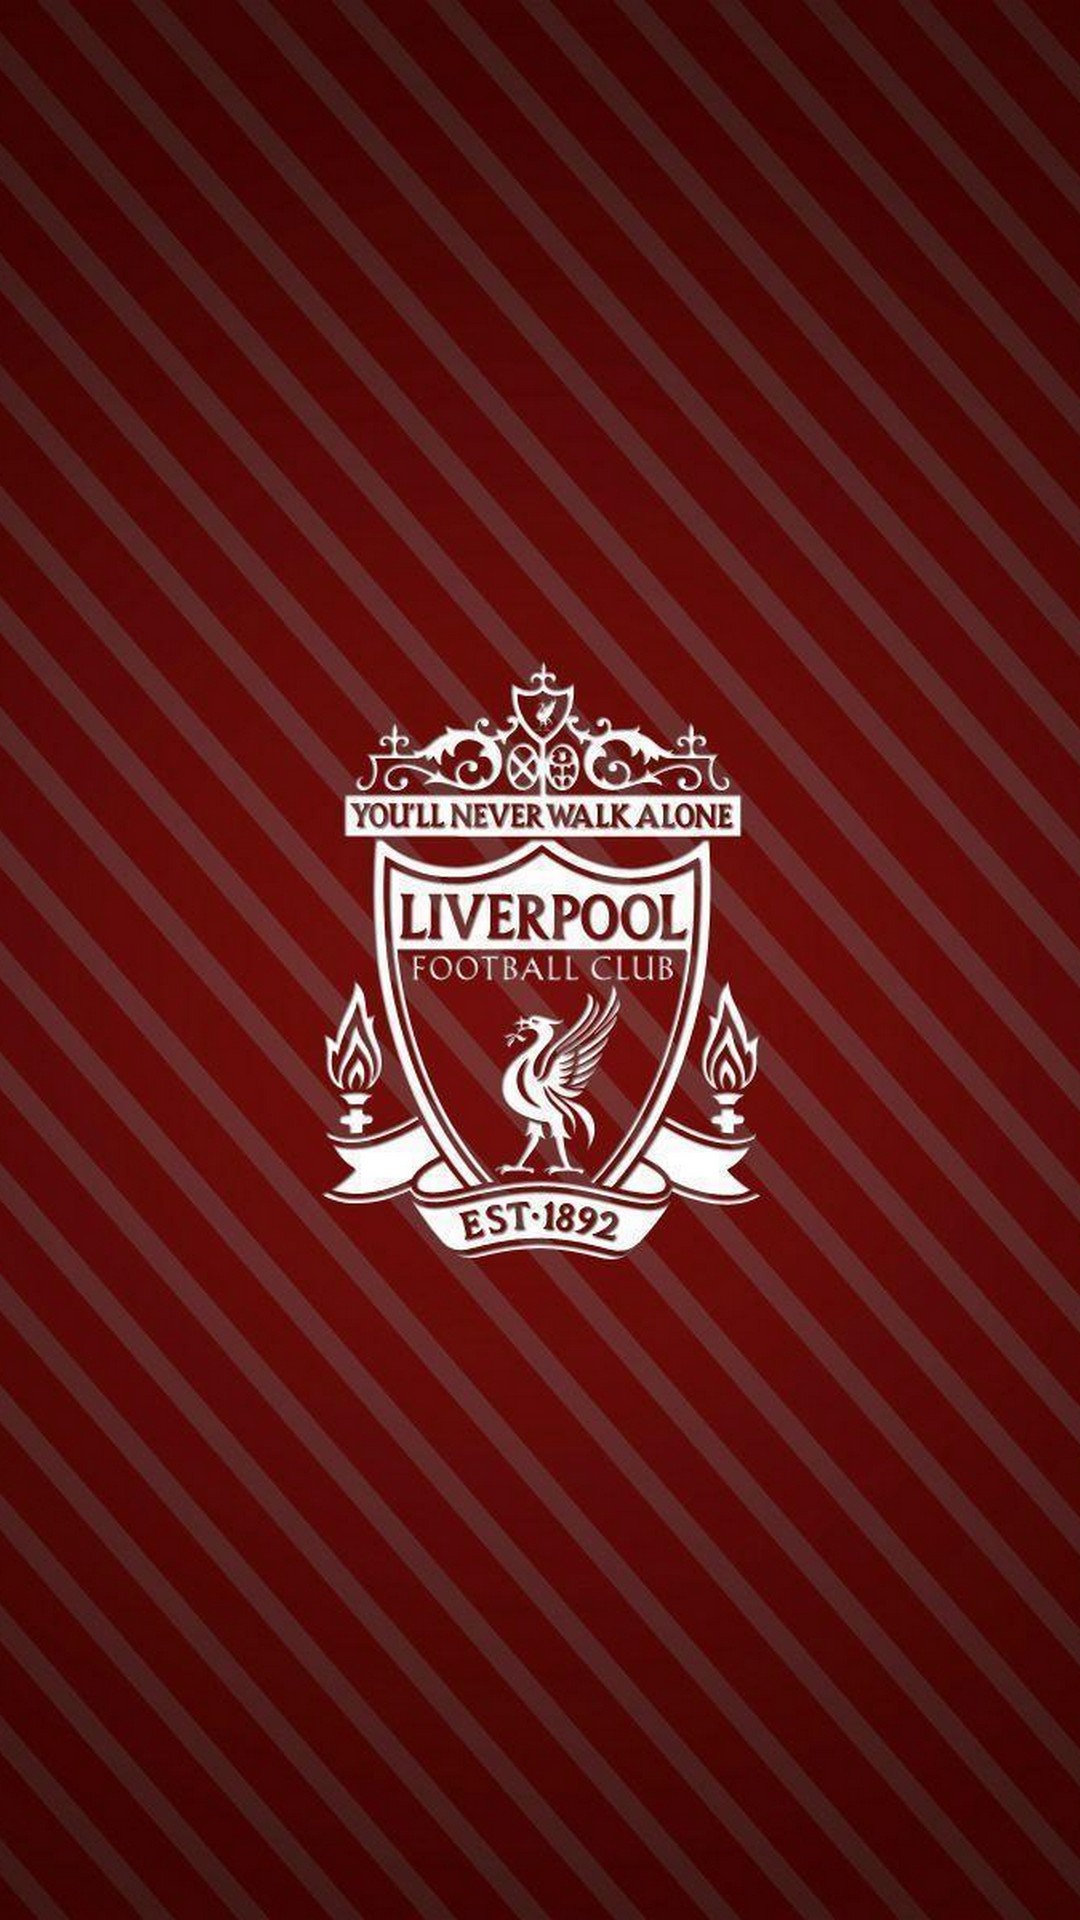 Liverpool HD Wallpapers For Mobile With high-resolution 1080X1920 pixel. You can use this wallpaper for your Desktop Computers, Mac Screensavers, Windows Backgrounds, iPhone Wallpapers, Tablet or Android Lock screen and another Mobile device